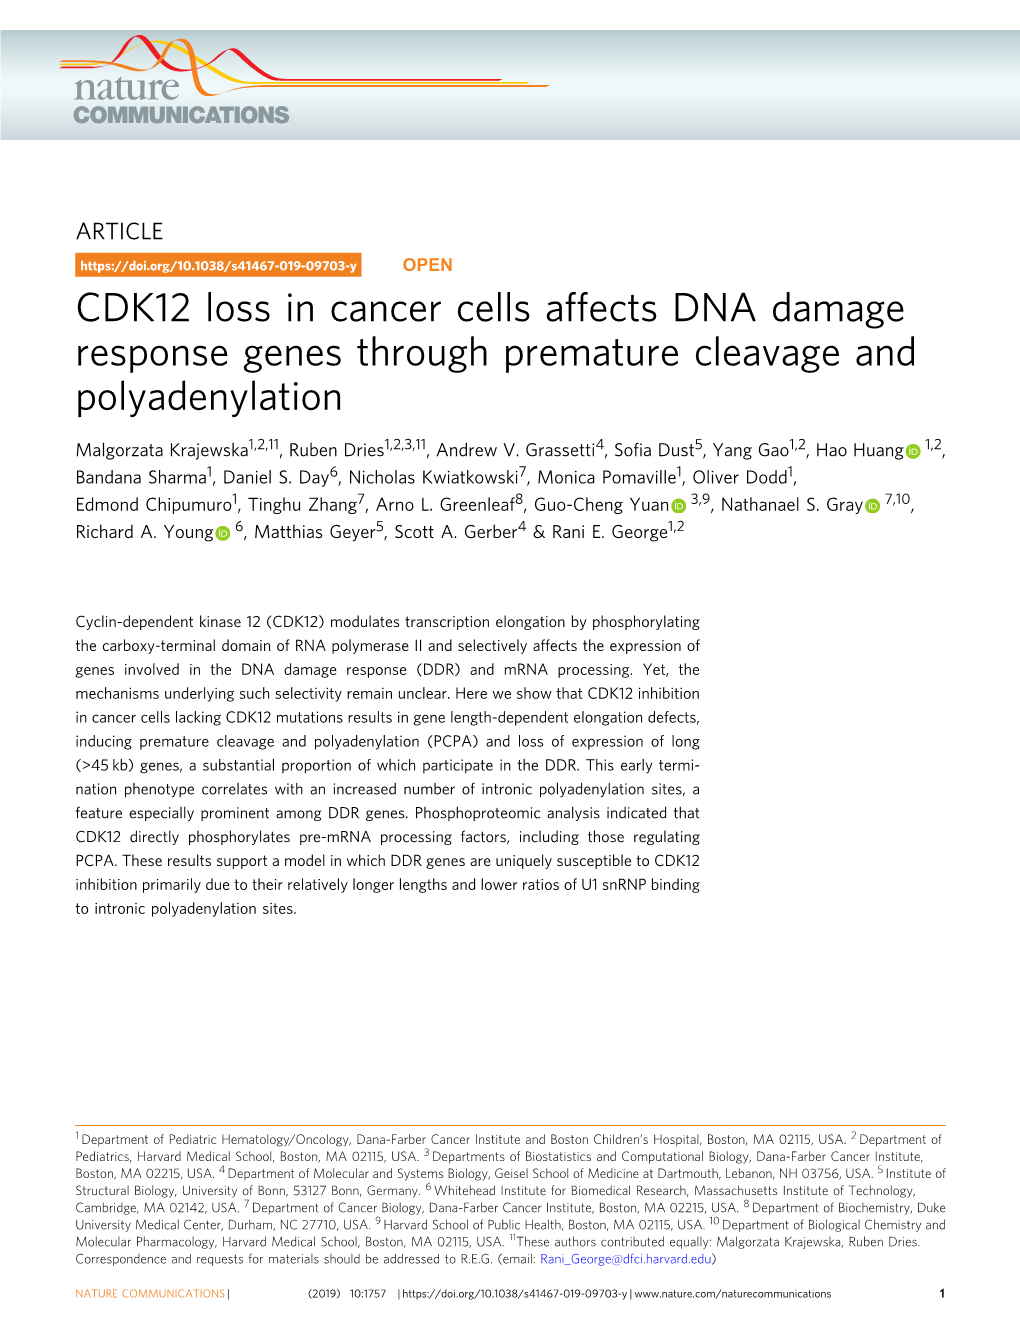 CDK12 Loss in Cancer Cells Affects DNA Damage Response Genes Through Premature Cleavage and Polyadenylation